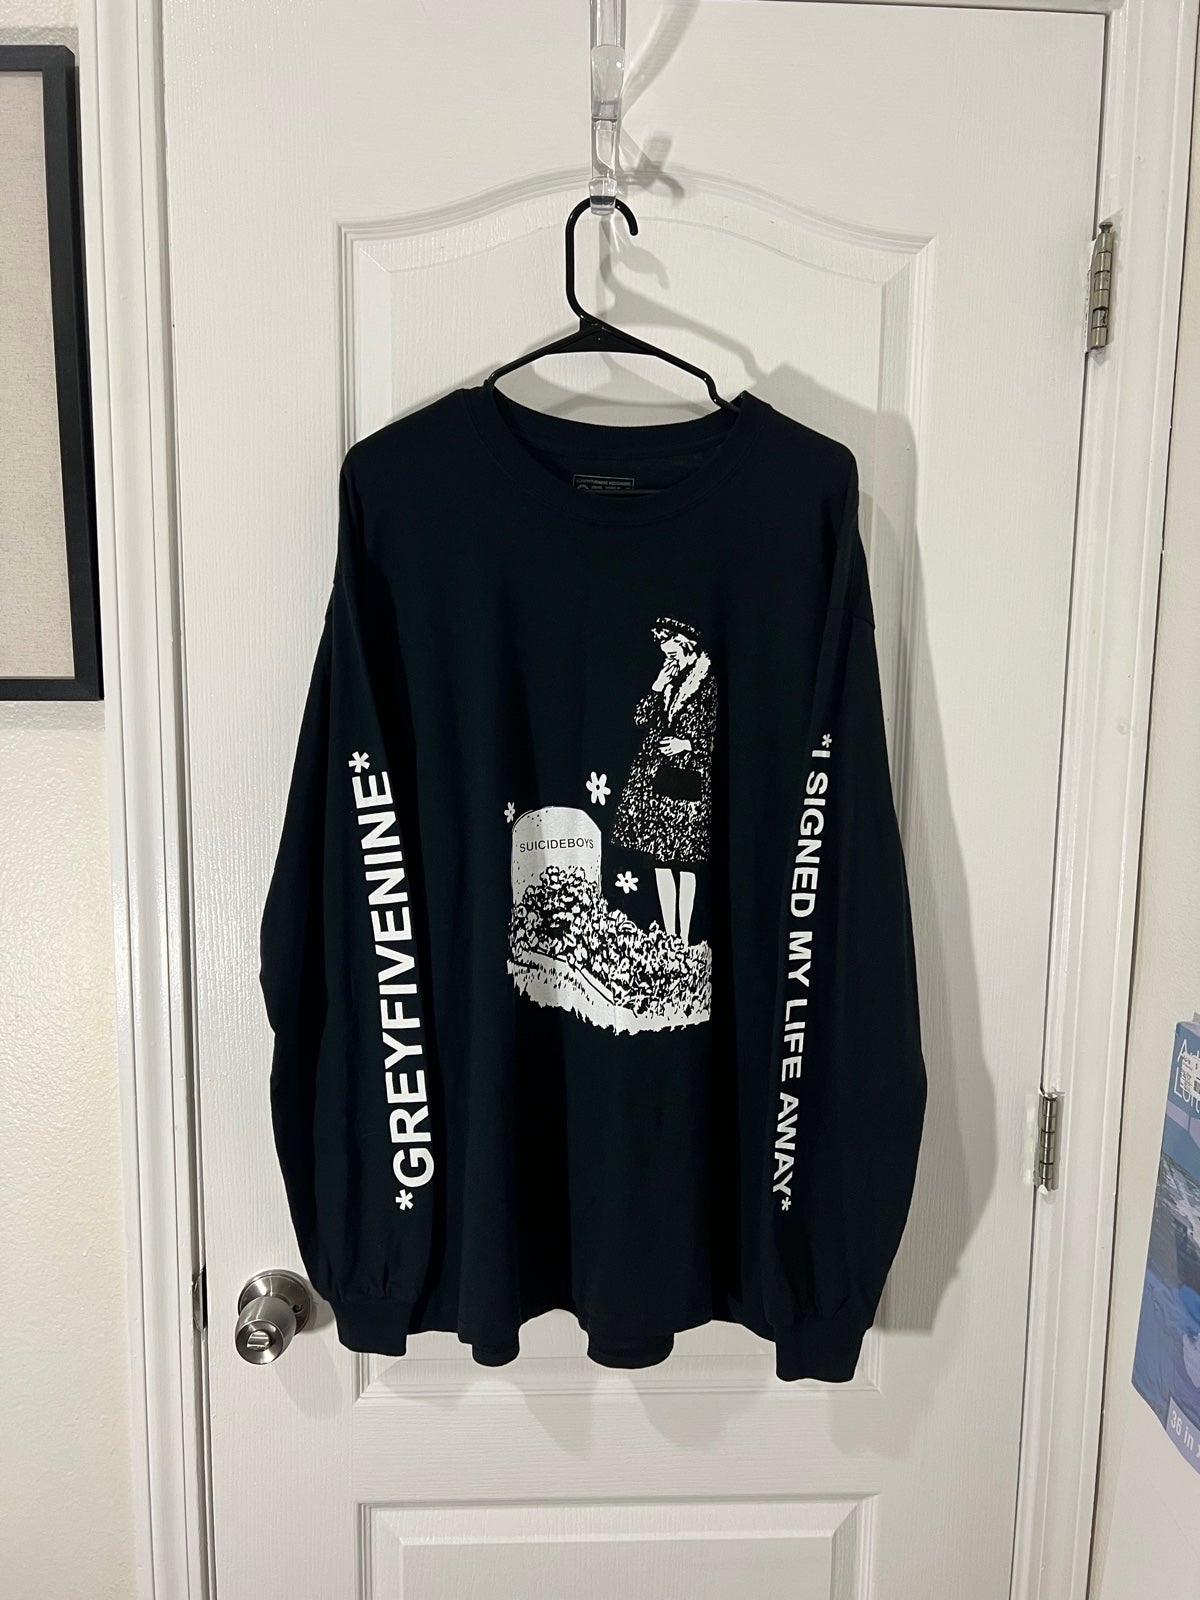 Suicideboys Store: Your Source for Quality Underground Merchandise